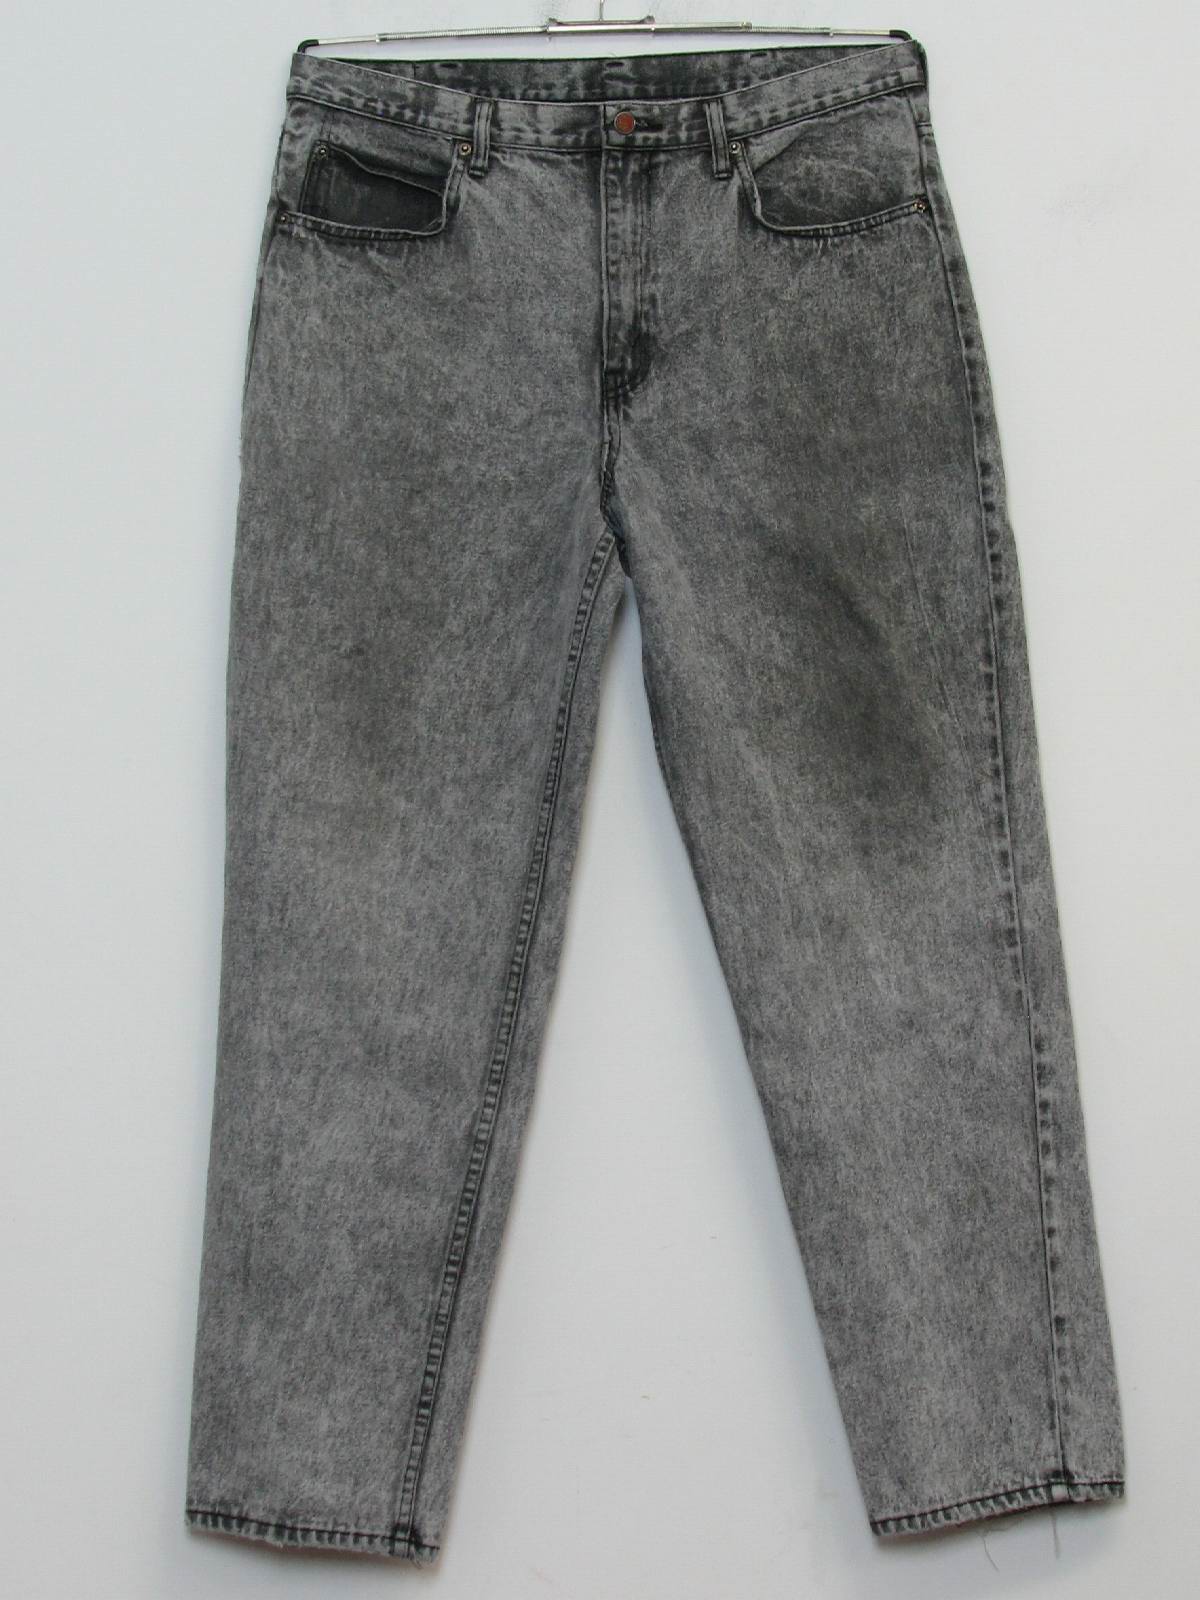 Retro 1980s Pants: 80s -Brittania- Mens shaded grey stone washed ...